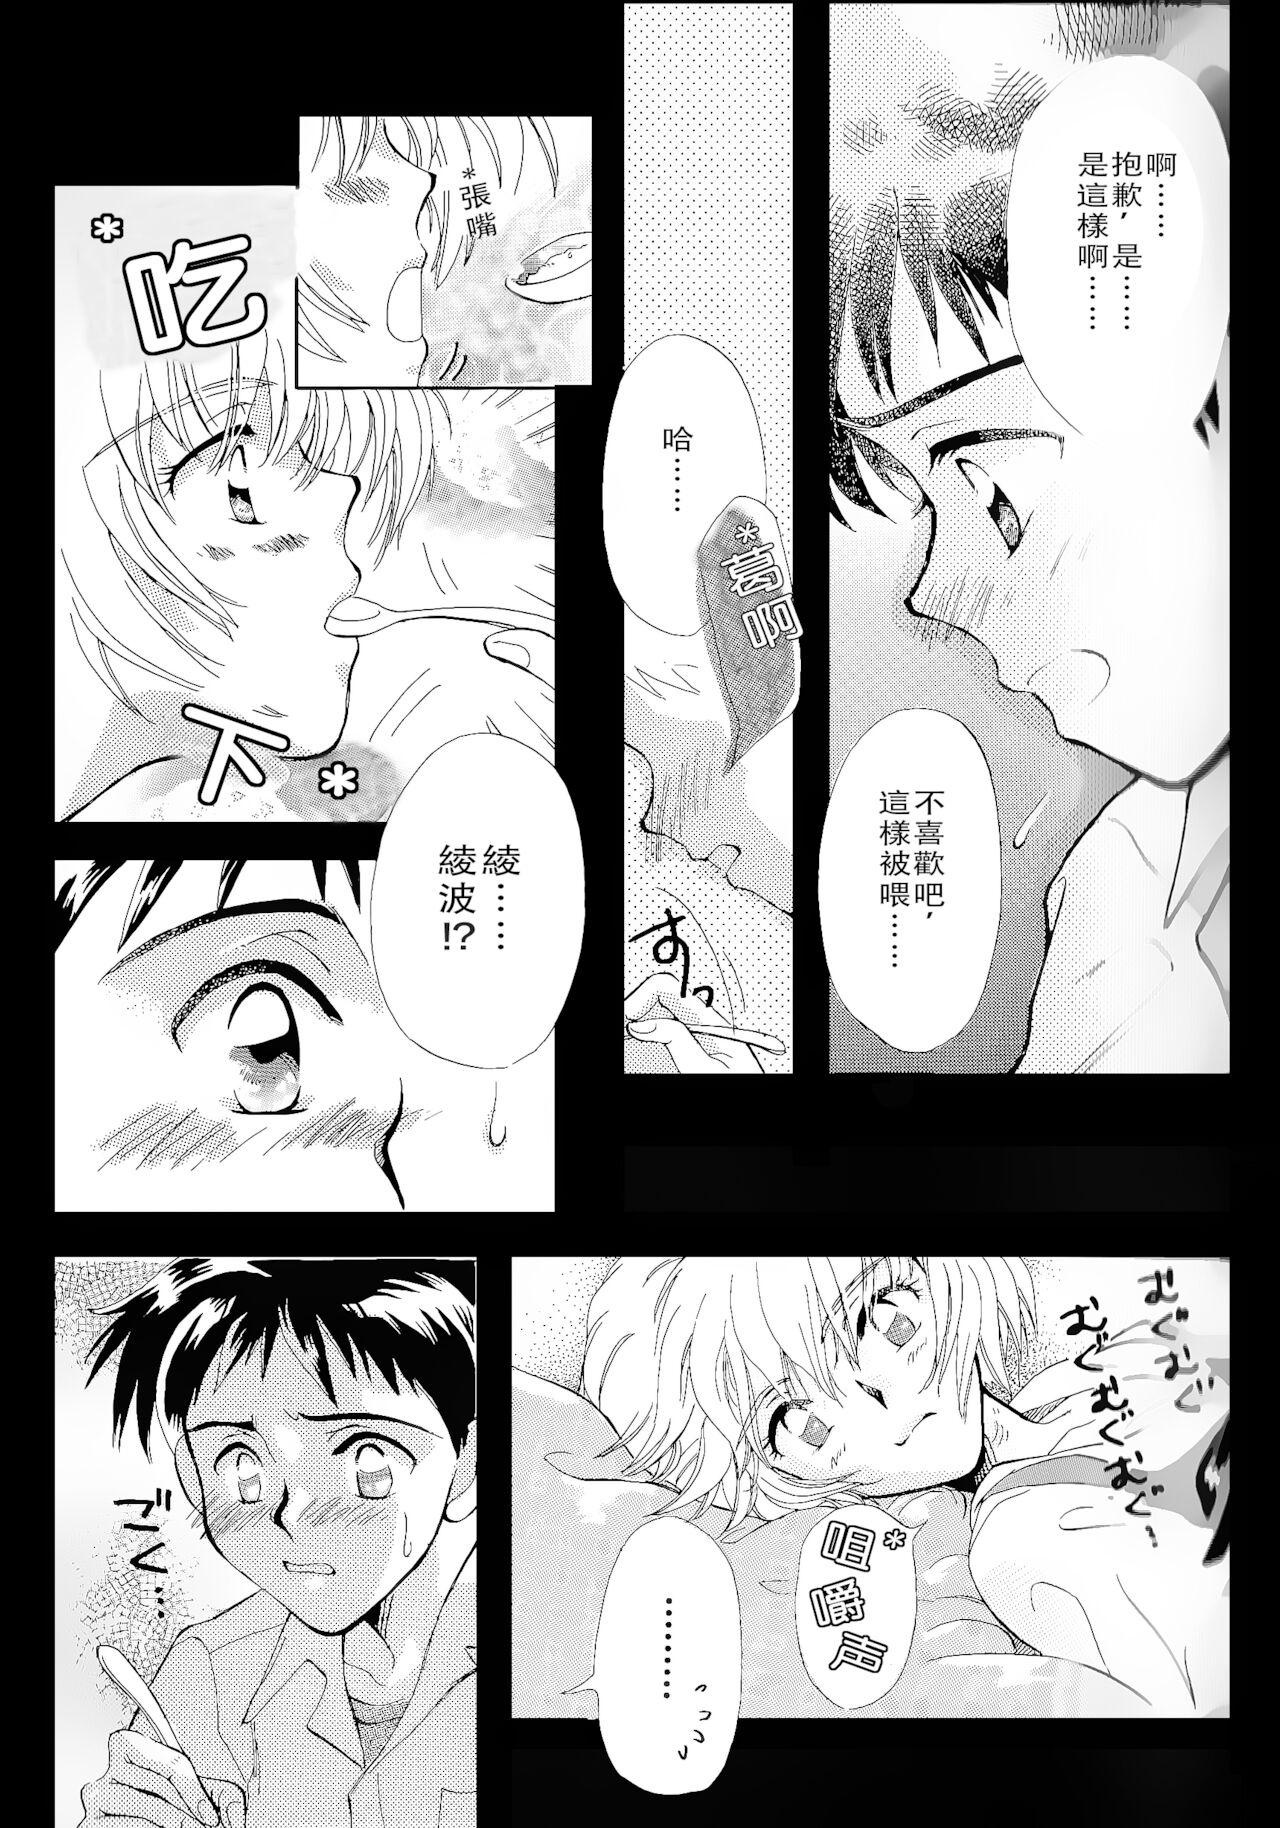 The PEPPY ANGEL episode0.1 - Neon genesis evangelion Pure 18 - Page 10